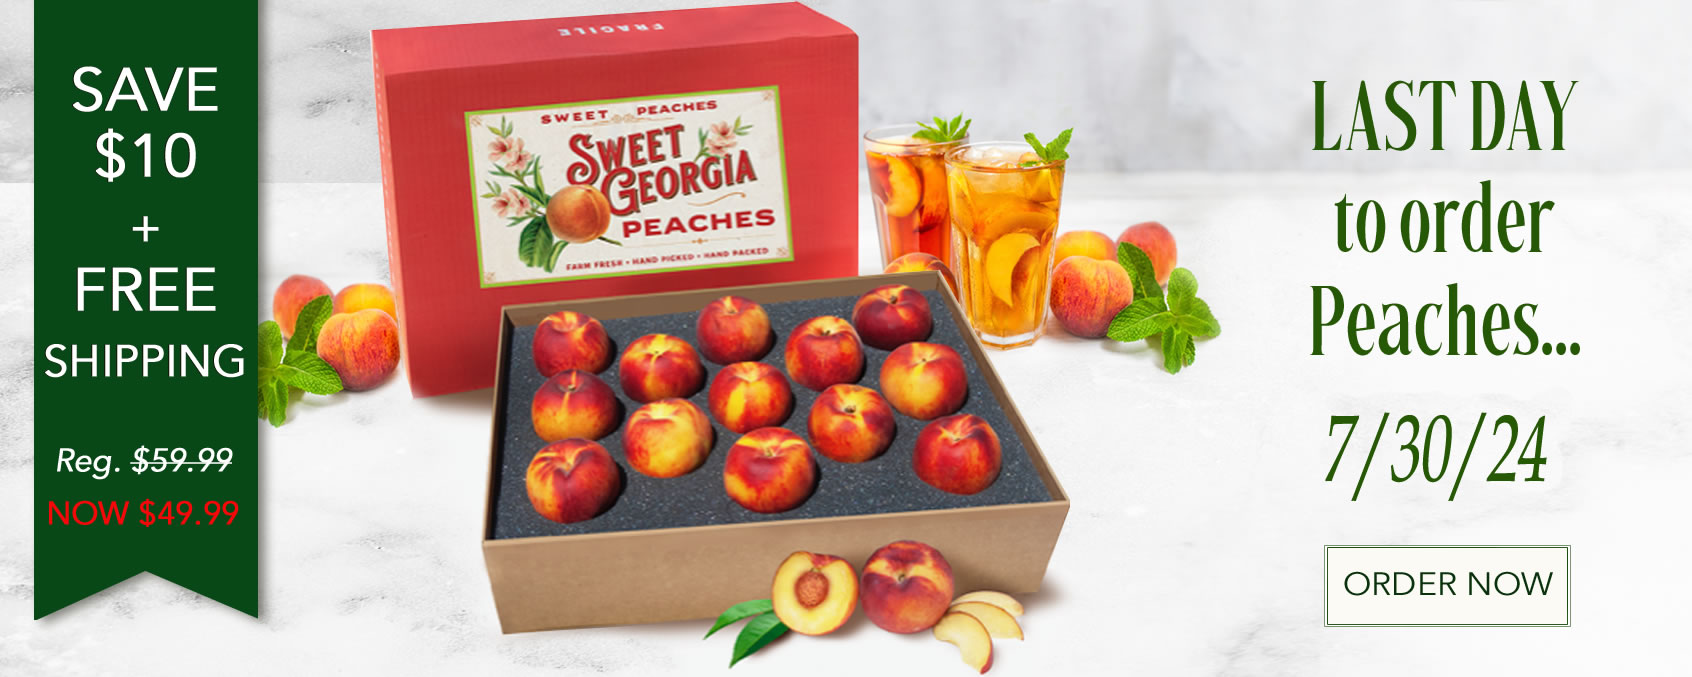 Save $10 + Free Shipping! Georgia Peaches.  Order by July 30th